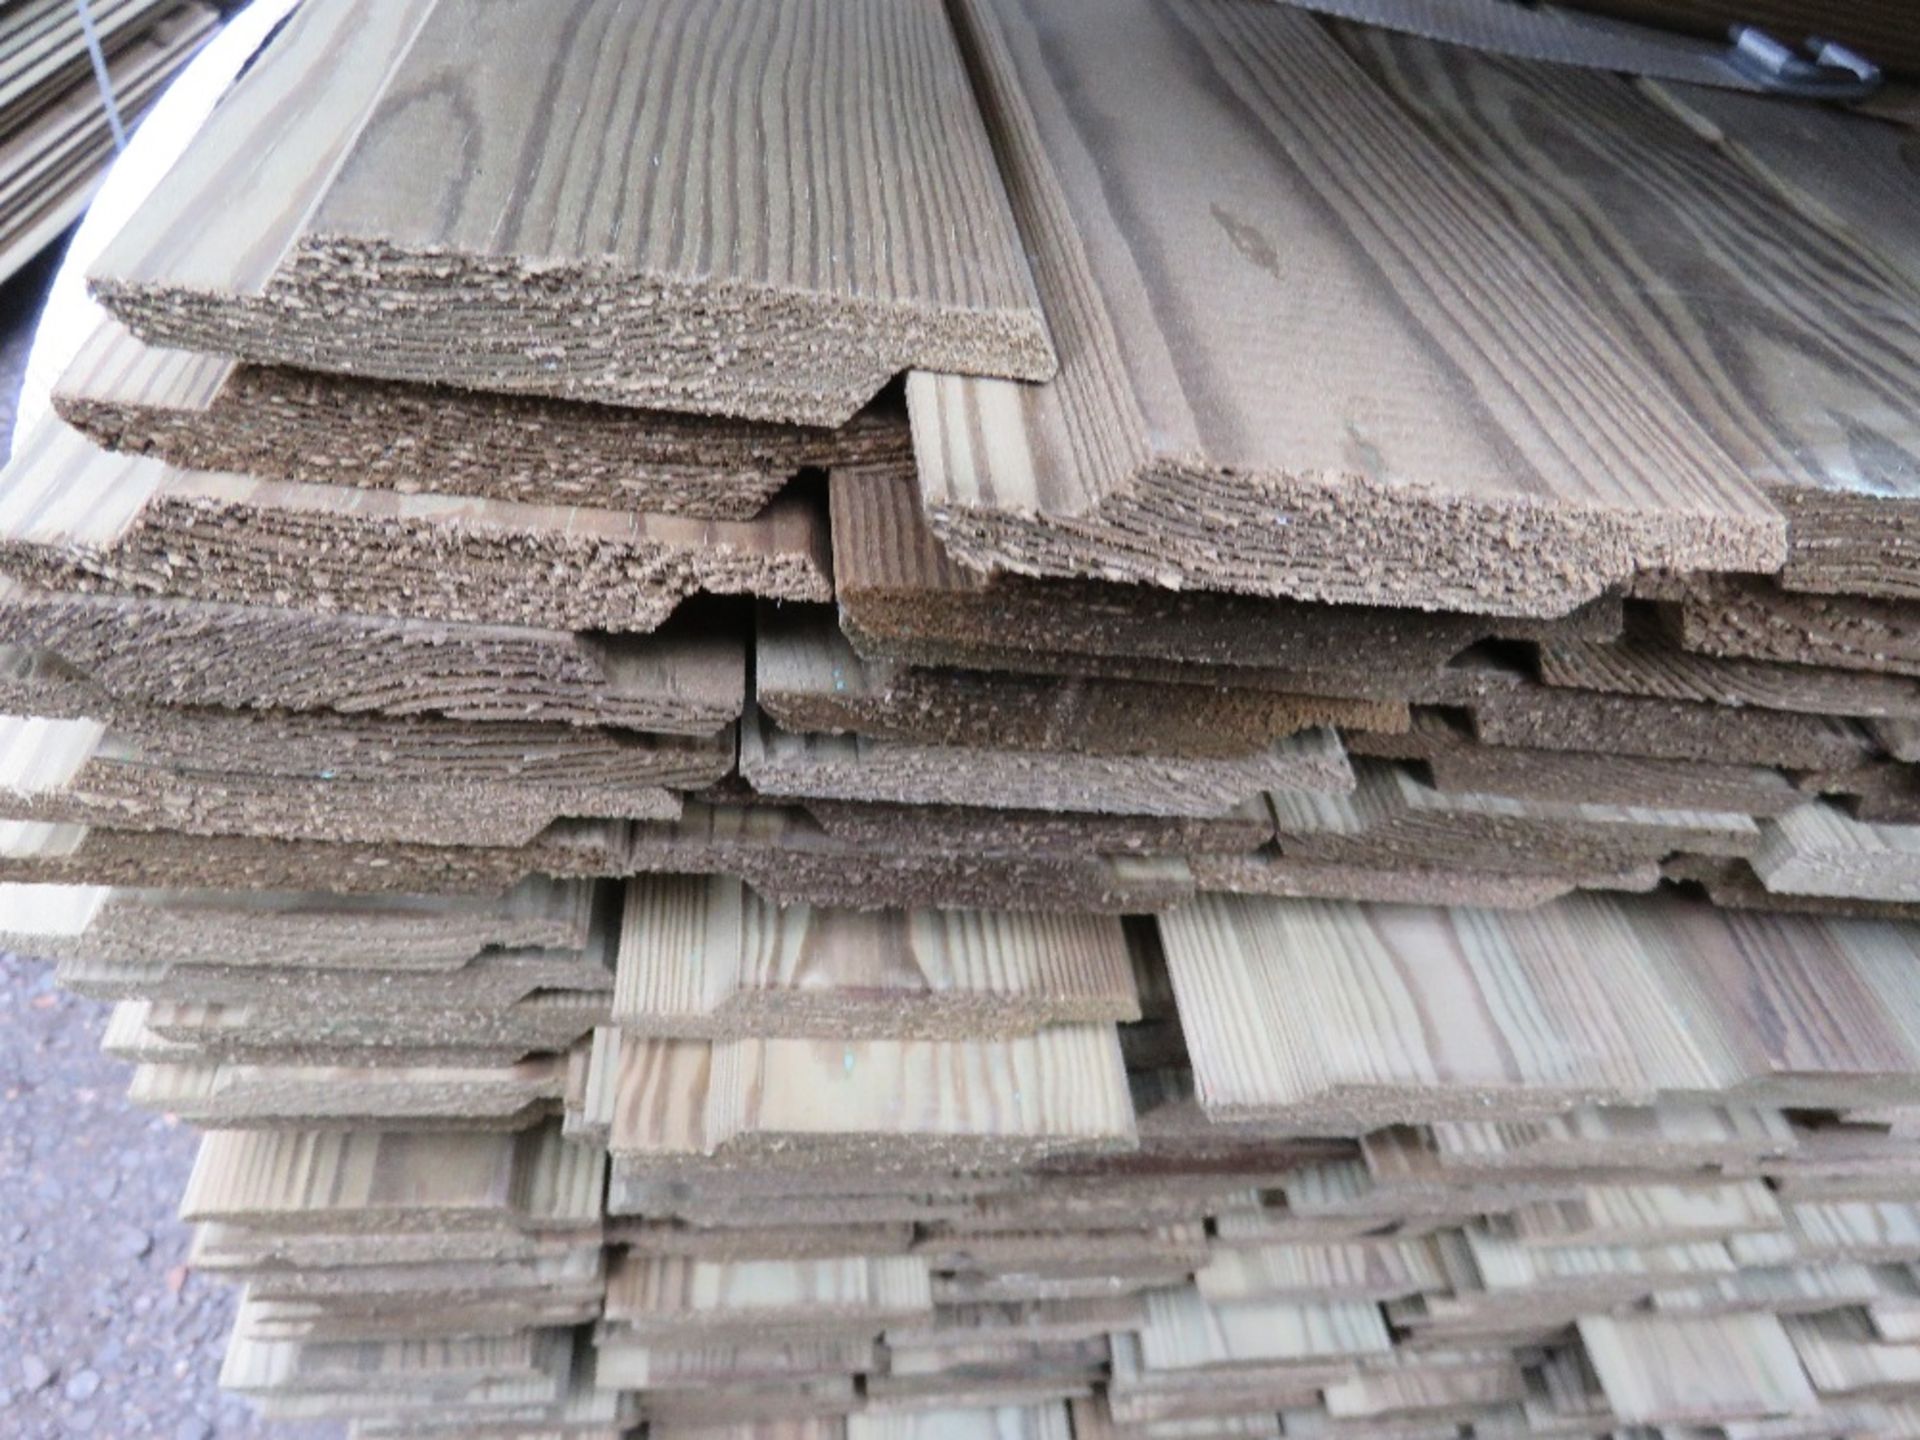 LARGE PACK OF PRESSURE TREATED SHIPLAP FENCE CLADDING TIMBER BOARDS. 1.83M LENGTH X 100MM WIDTH APPR - Image 3 of 4